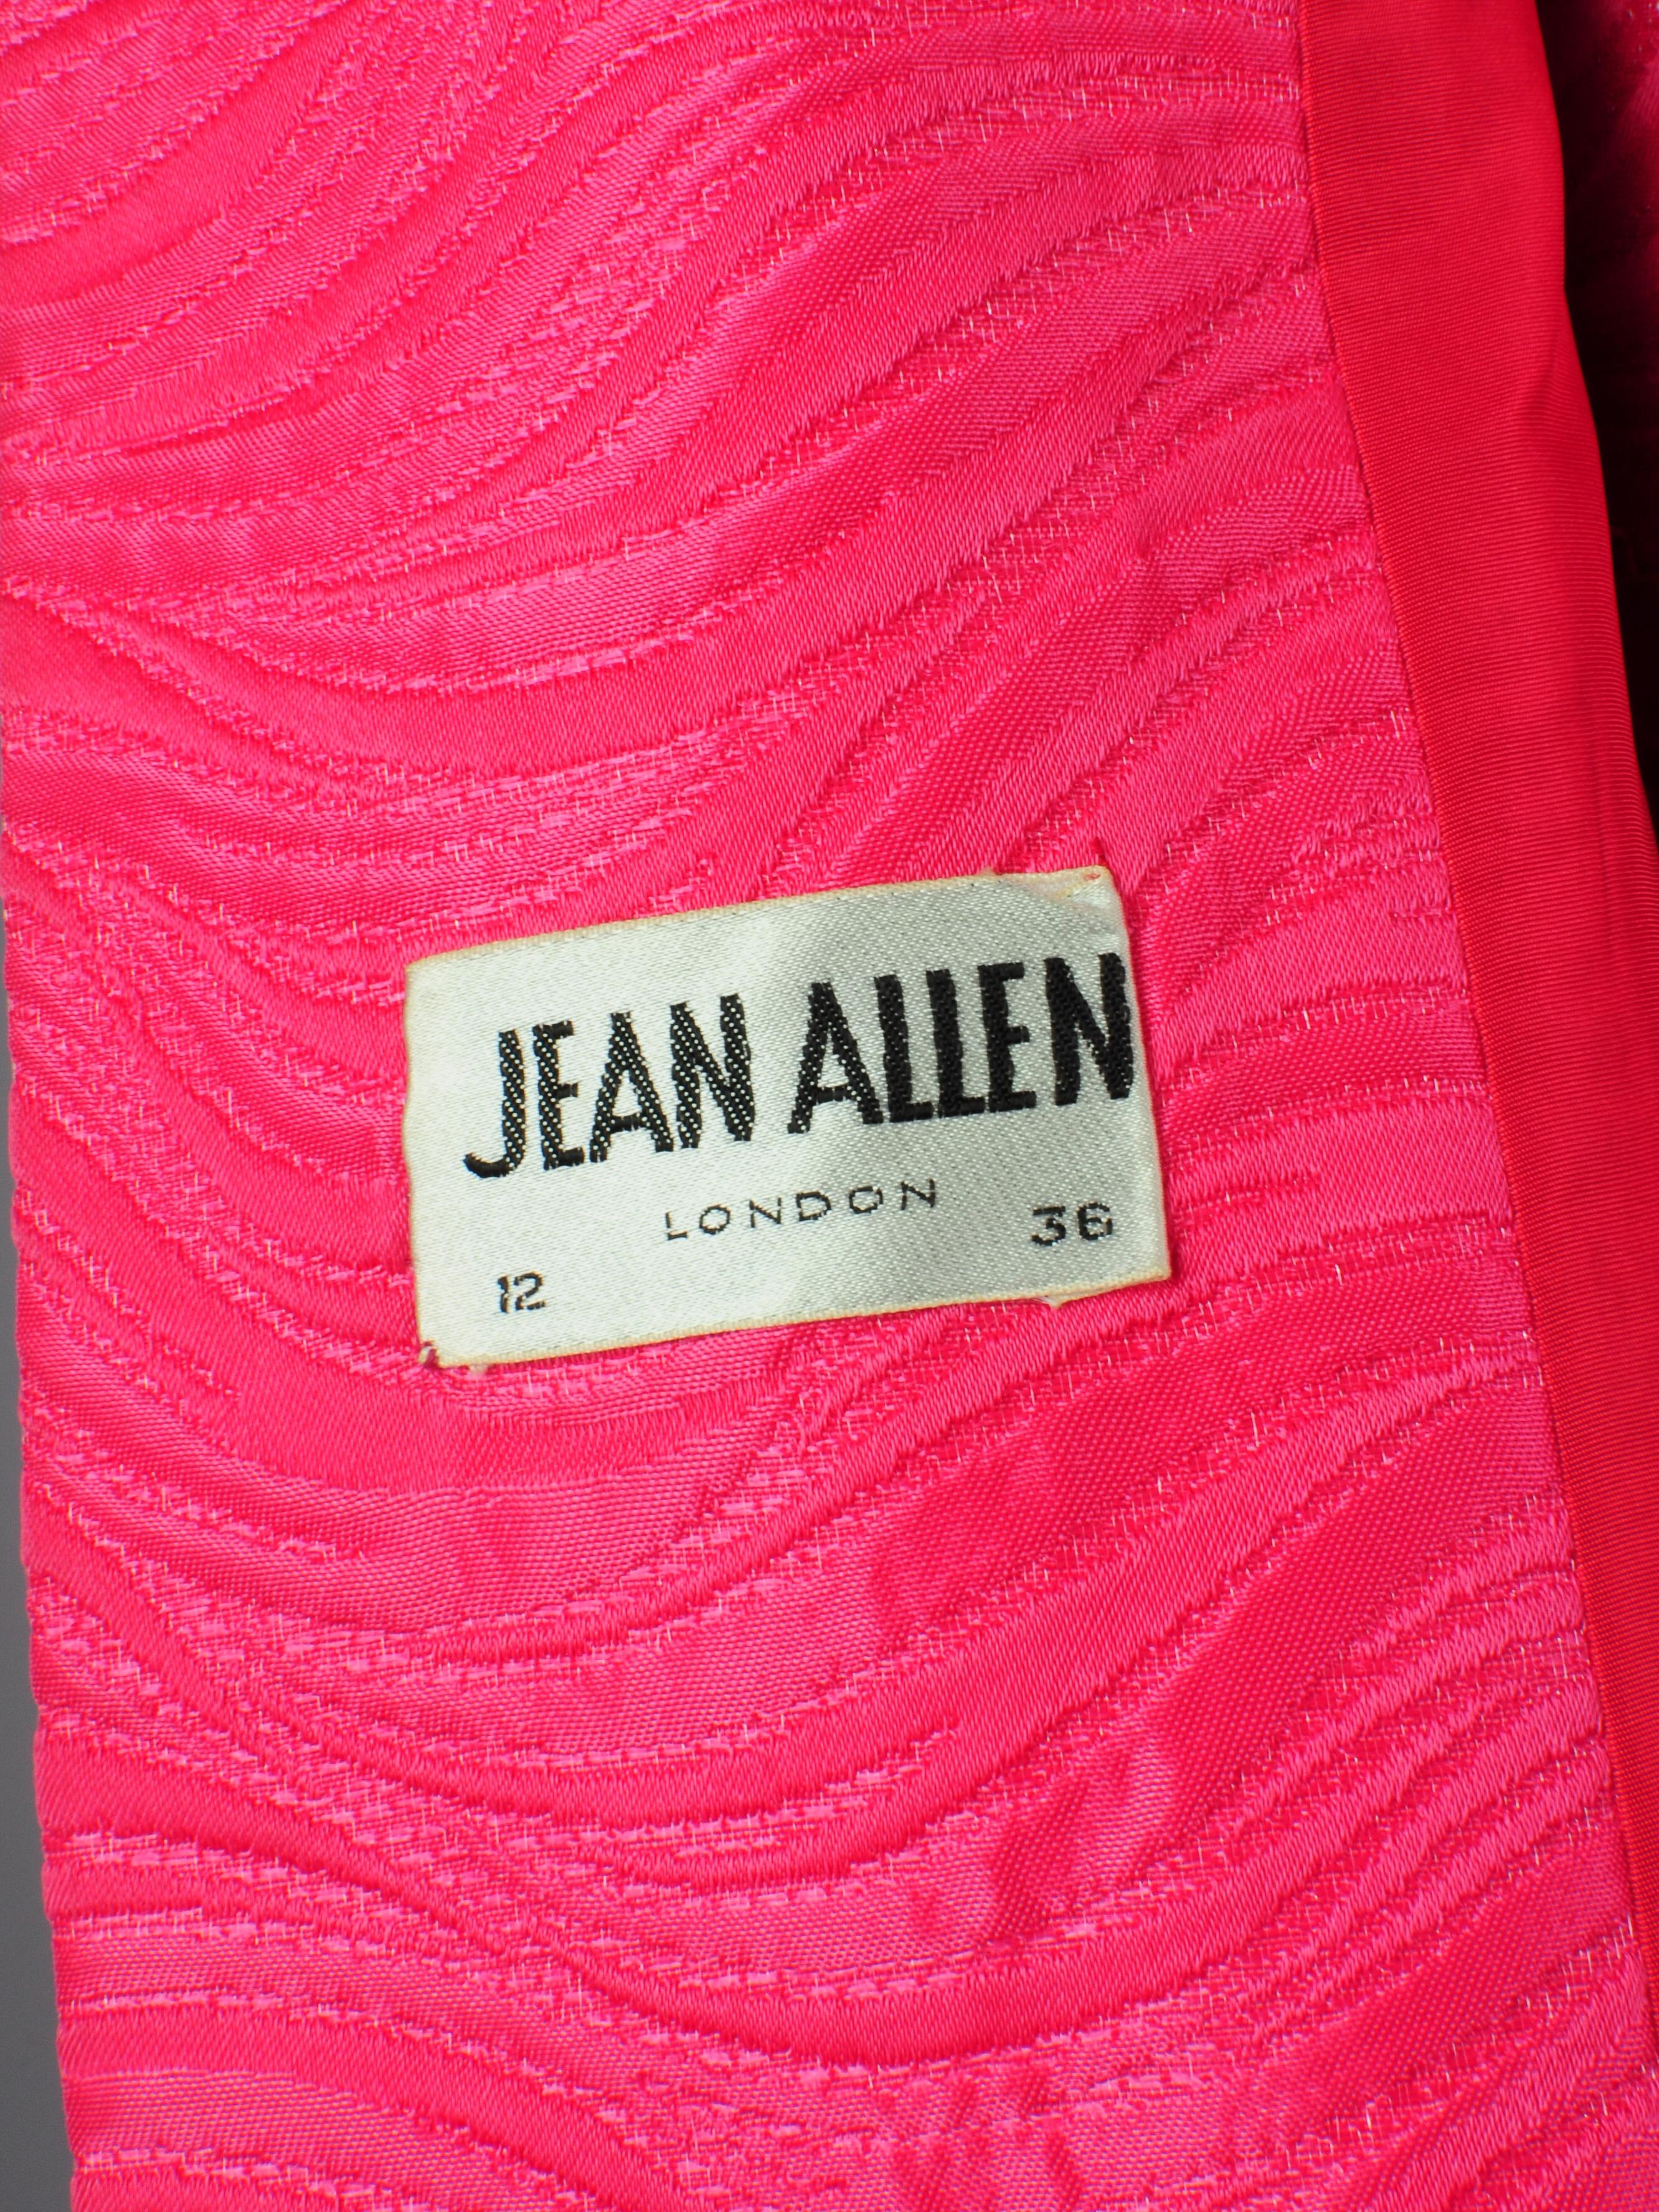 Jean Allen London Dress and Jacket Two Piece Set in Fuchsia Pink with Bow Detail In Fair Condition For Sale In AMSTERDAM, NL